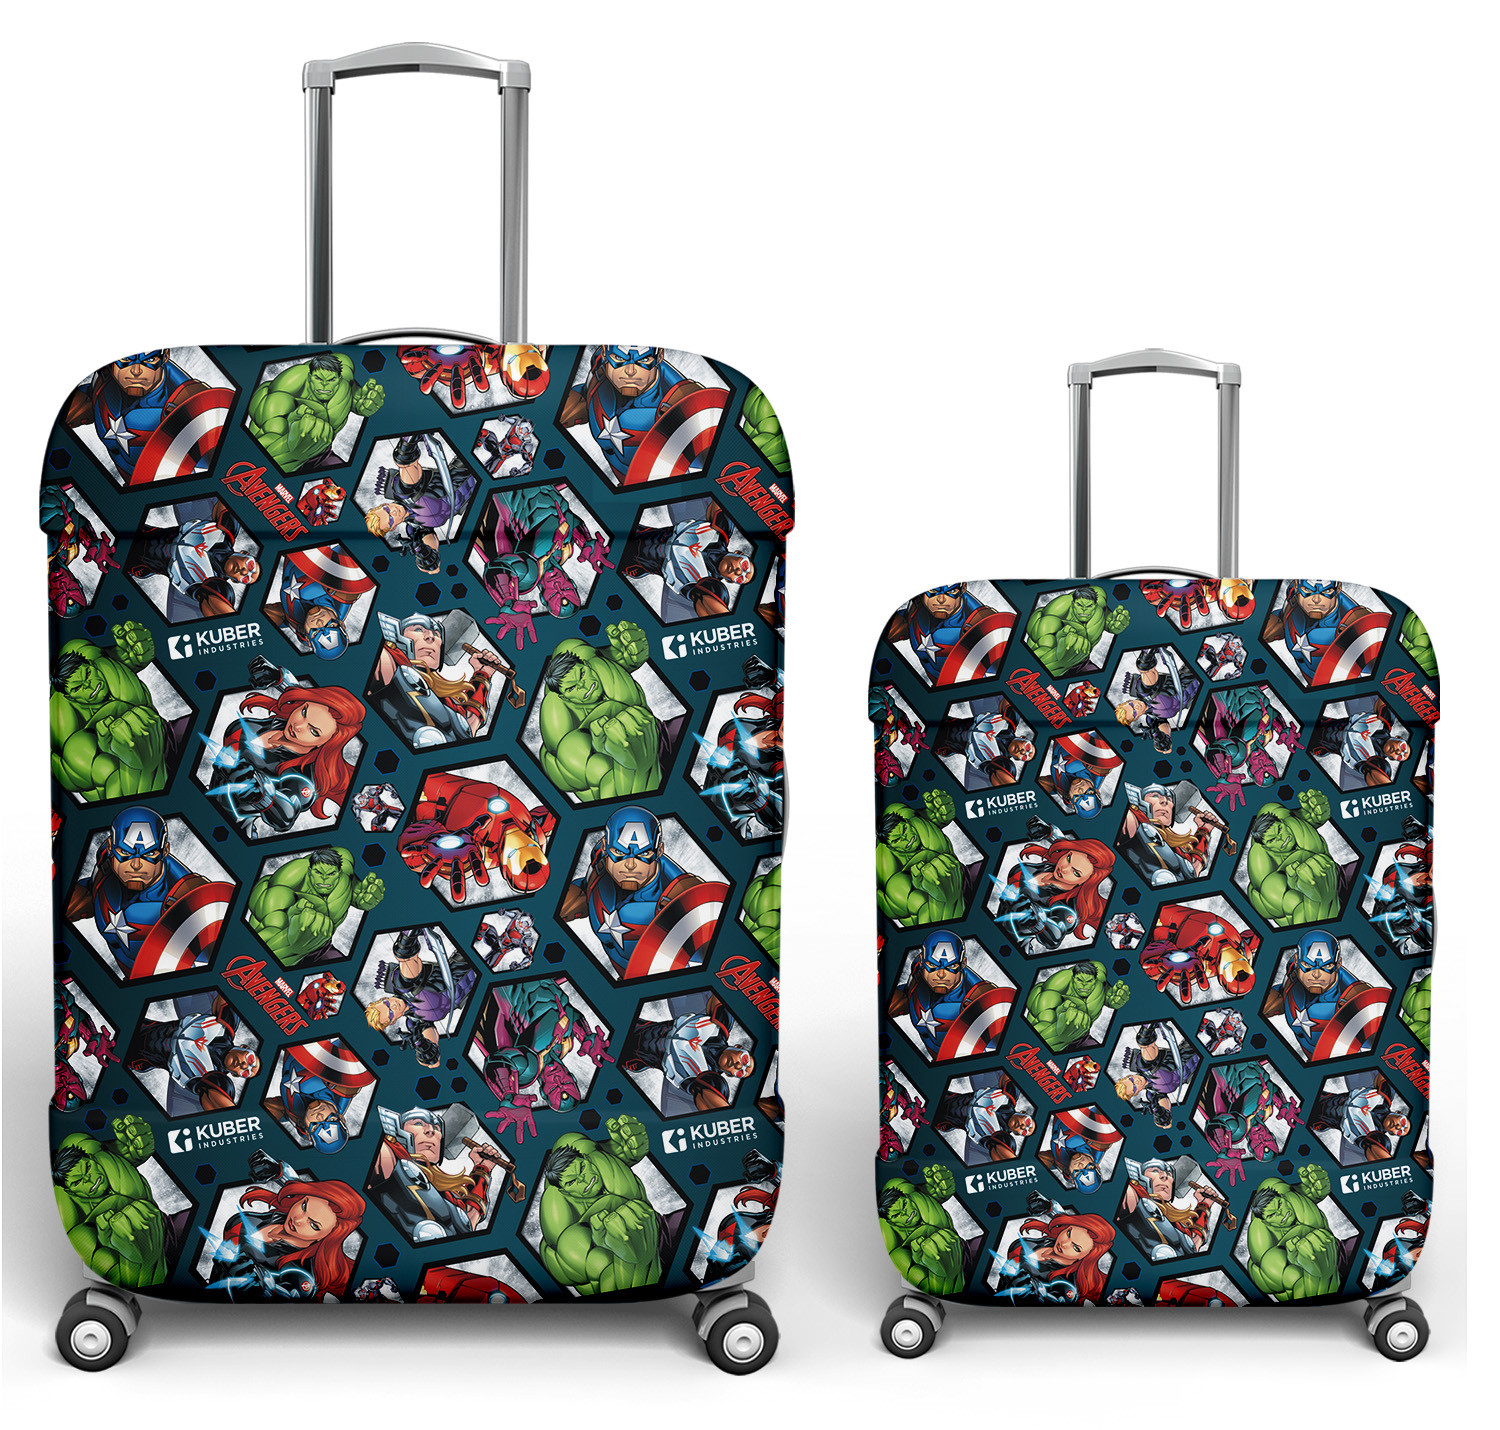 Kuber Industries Marvel Avengers Luggage Cover|Polyester Travel Suitcase Cover|Washable|Stretchable Suitcase Cover|18-22 Inch-Small|26-30 Inch-Large|Pack of 2 (Blue)